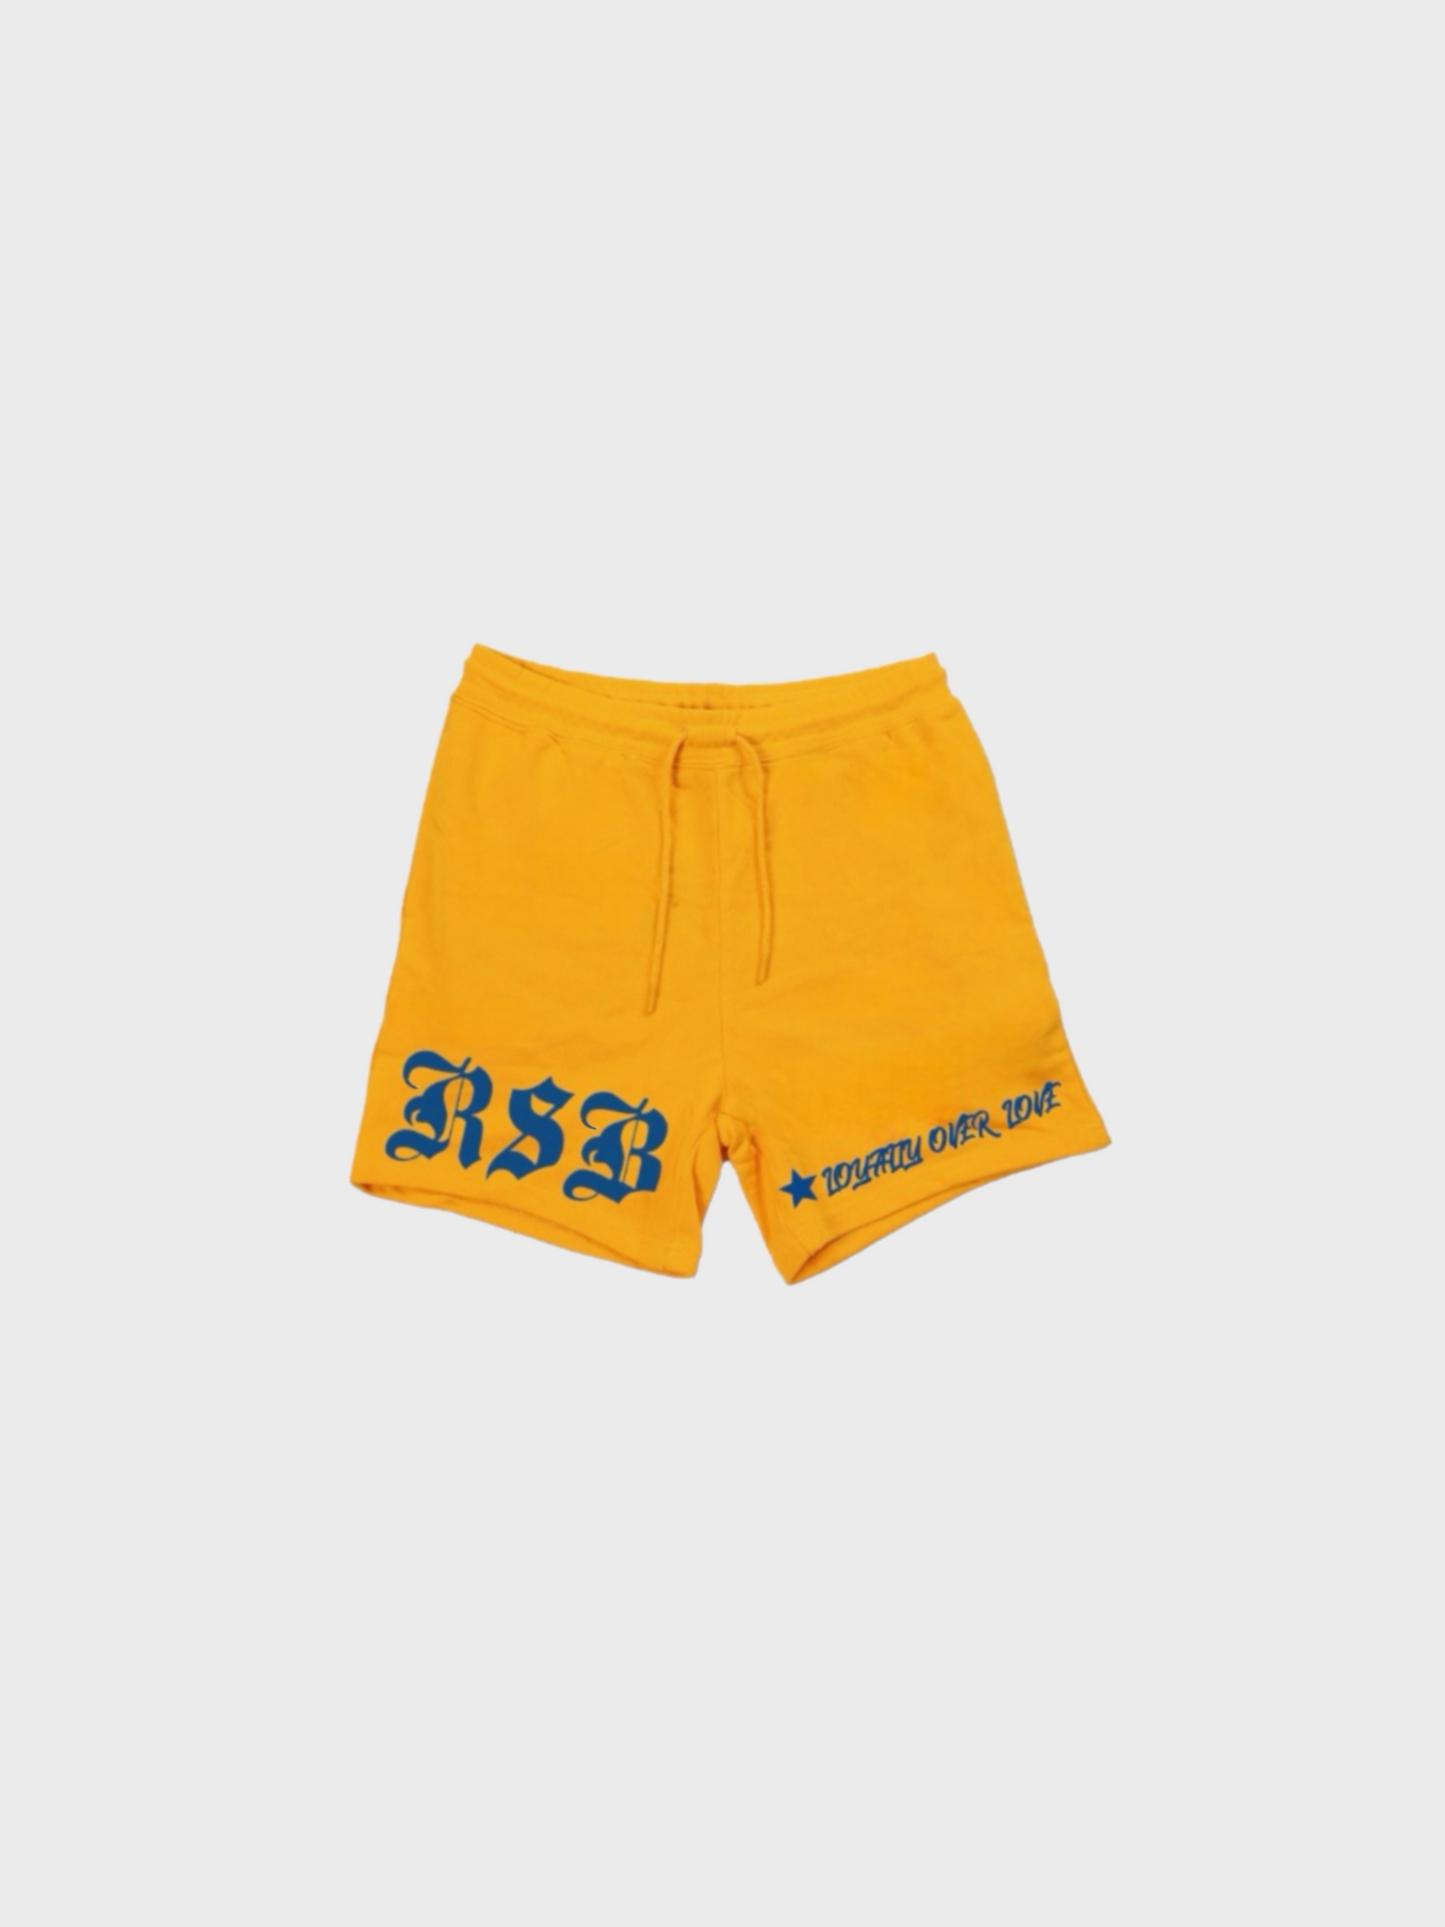 LOYALTY OVER LOVE SHORTS- GOLD/BLUE